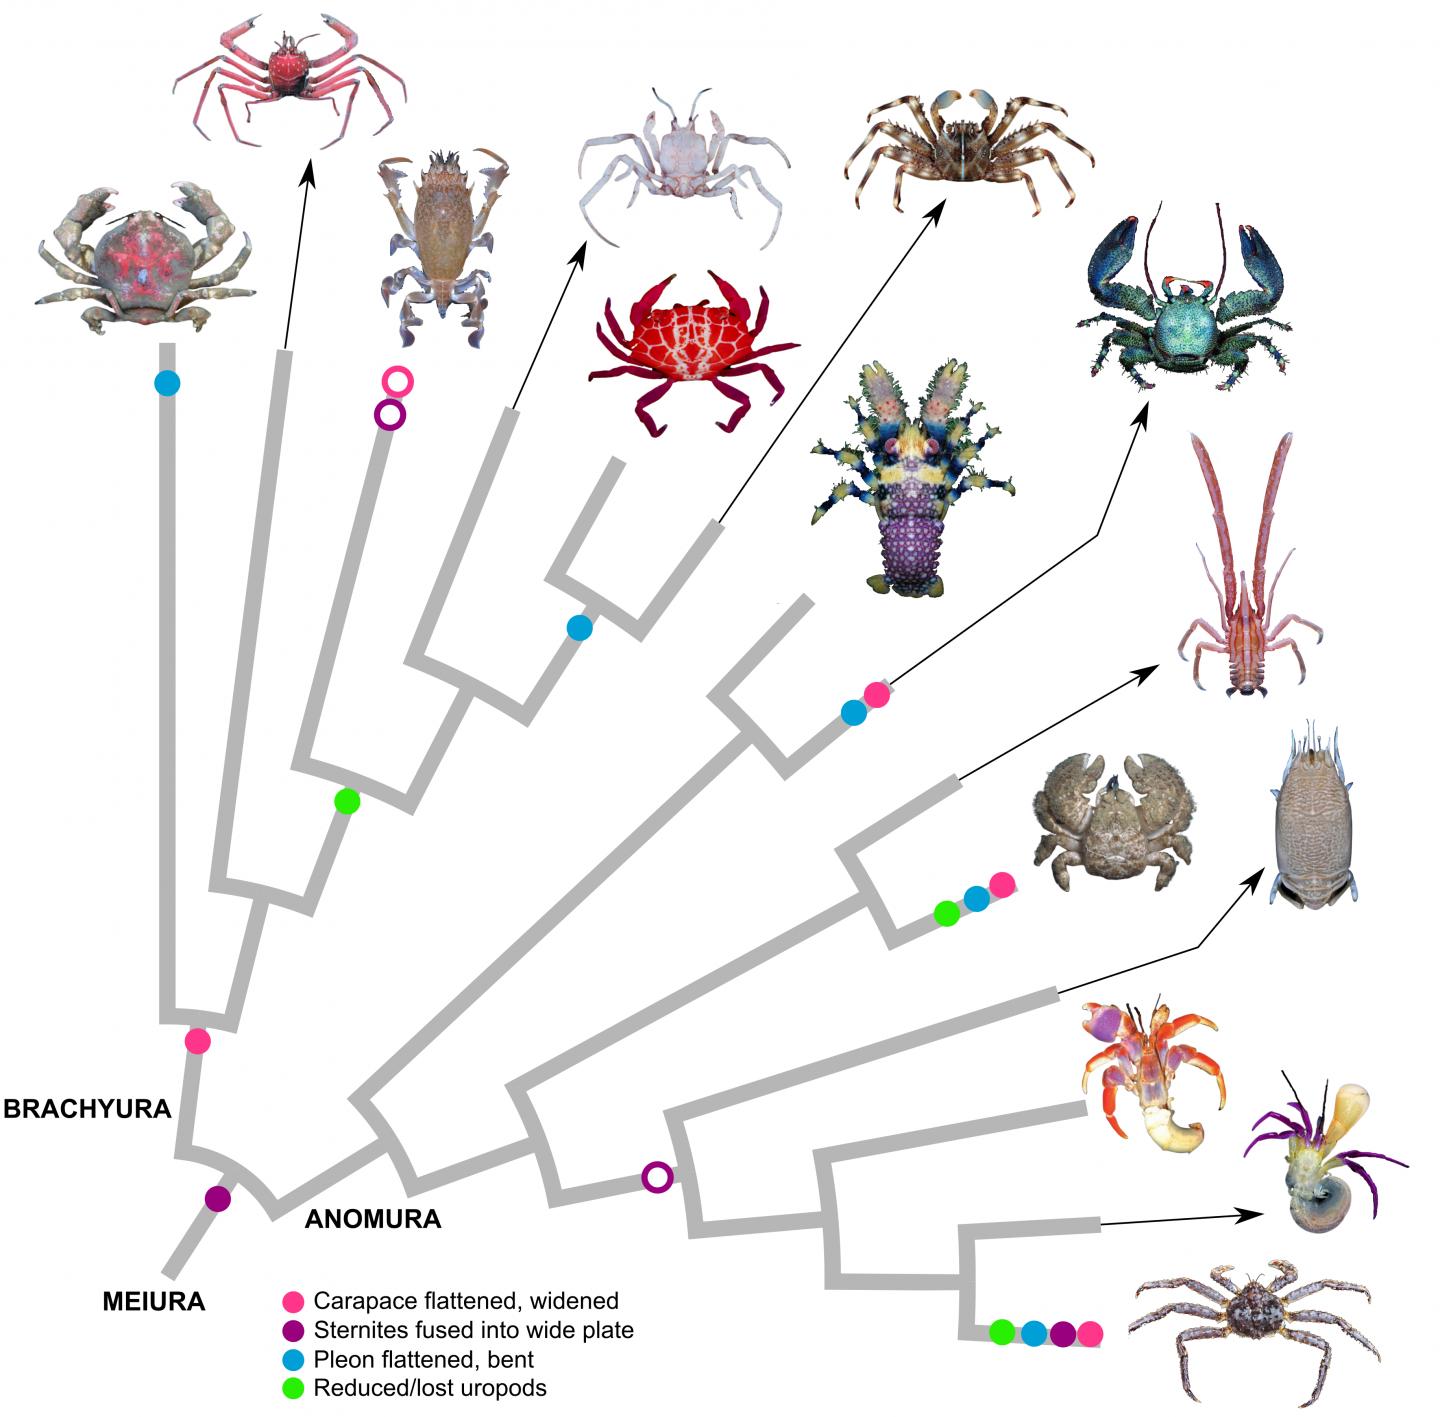 Taxonomic tree showing lineages of carcinized and decarcinated crabs